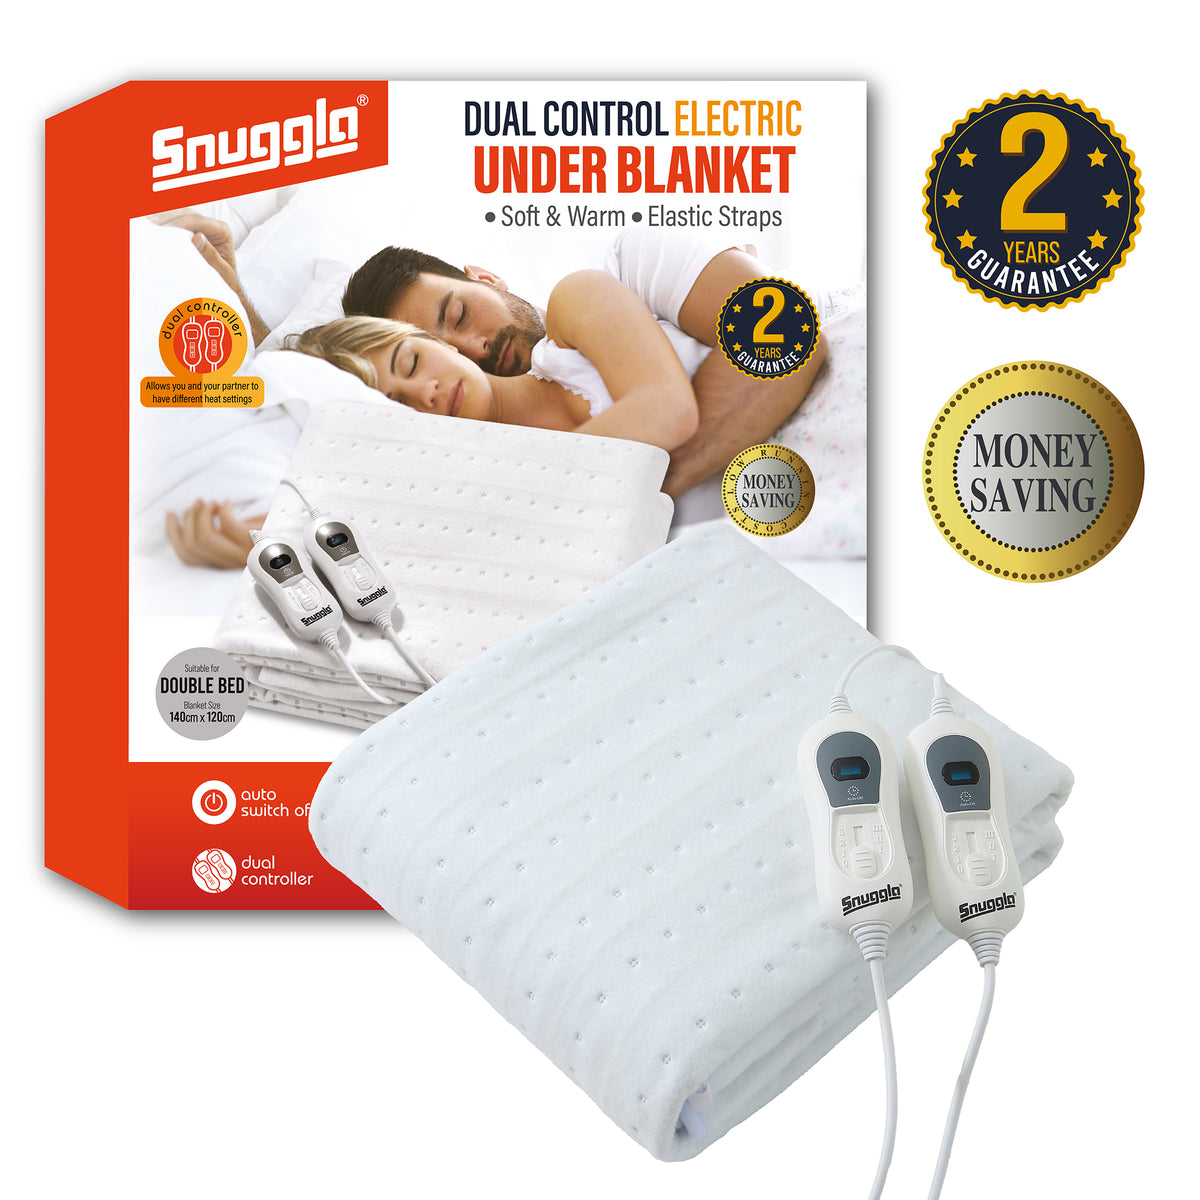 Double Size Heated Electric Under Blanket with 3 Heat Settings